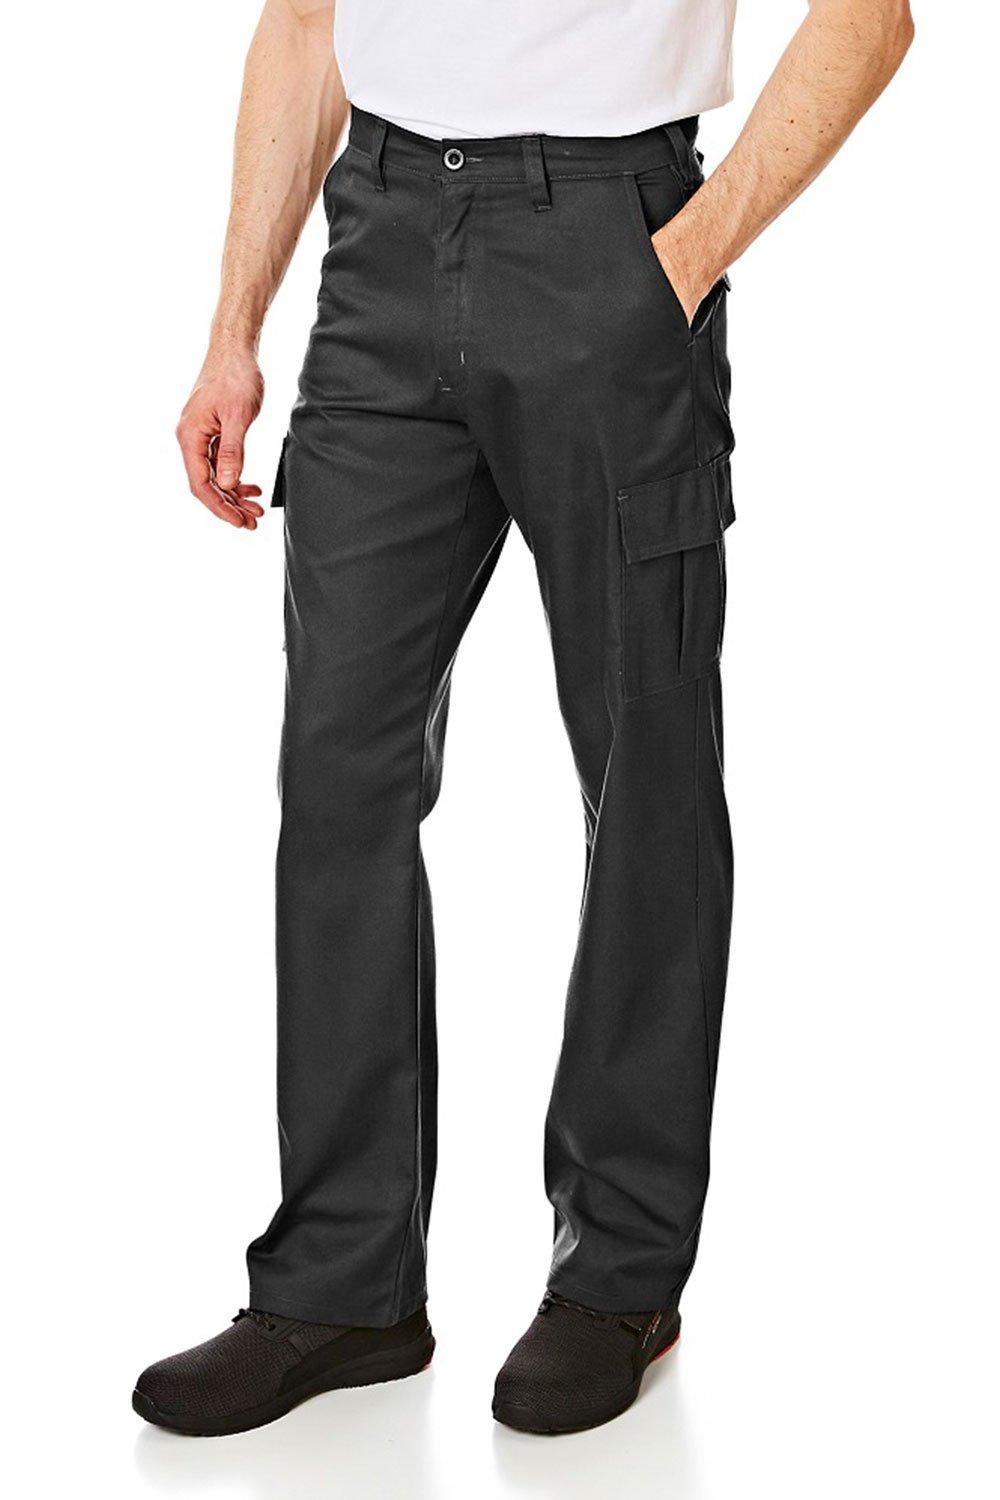 Buy Lee Cooper Relaxed Fit Full Length Cargo Pants with Button Closure |  Splash KSA